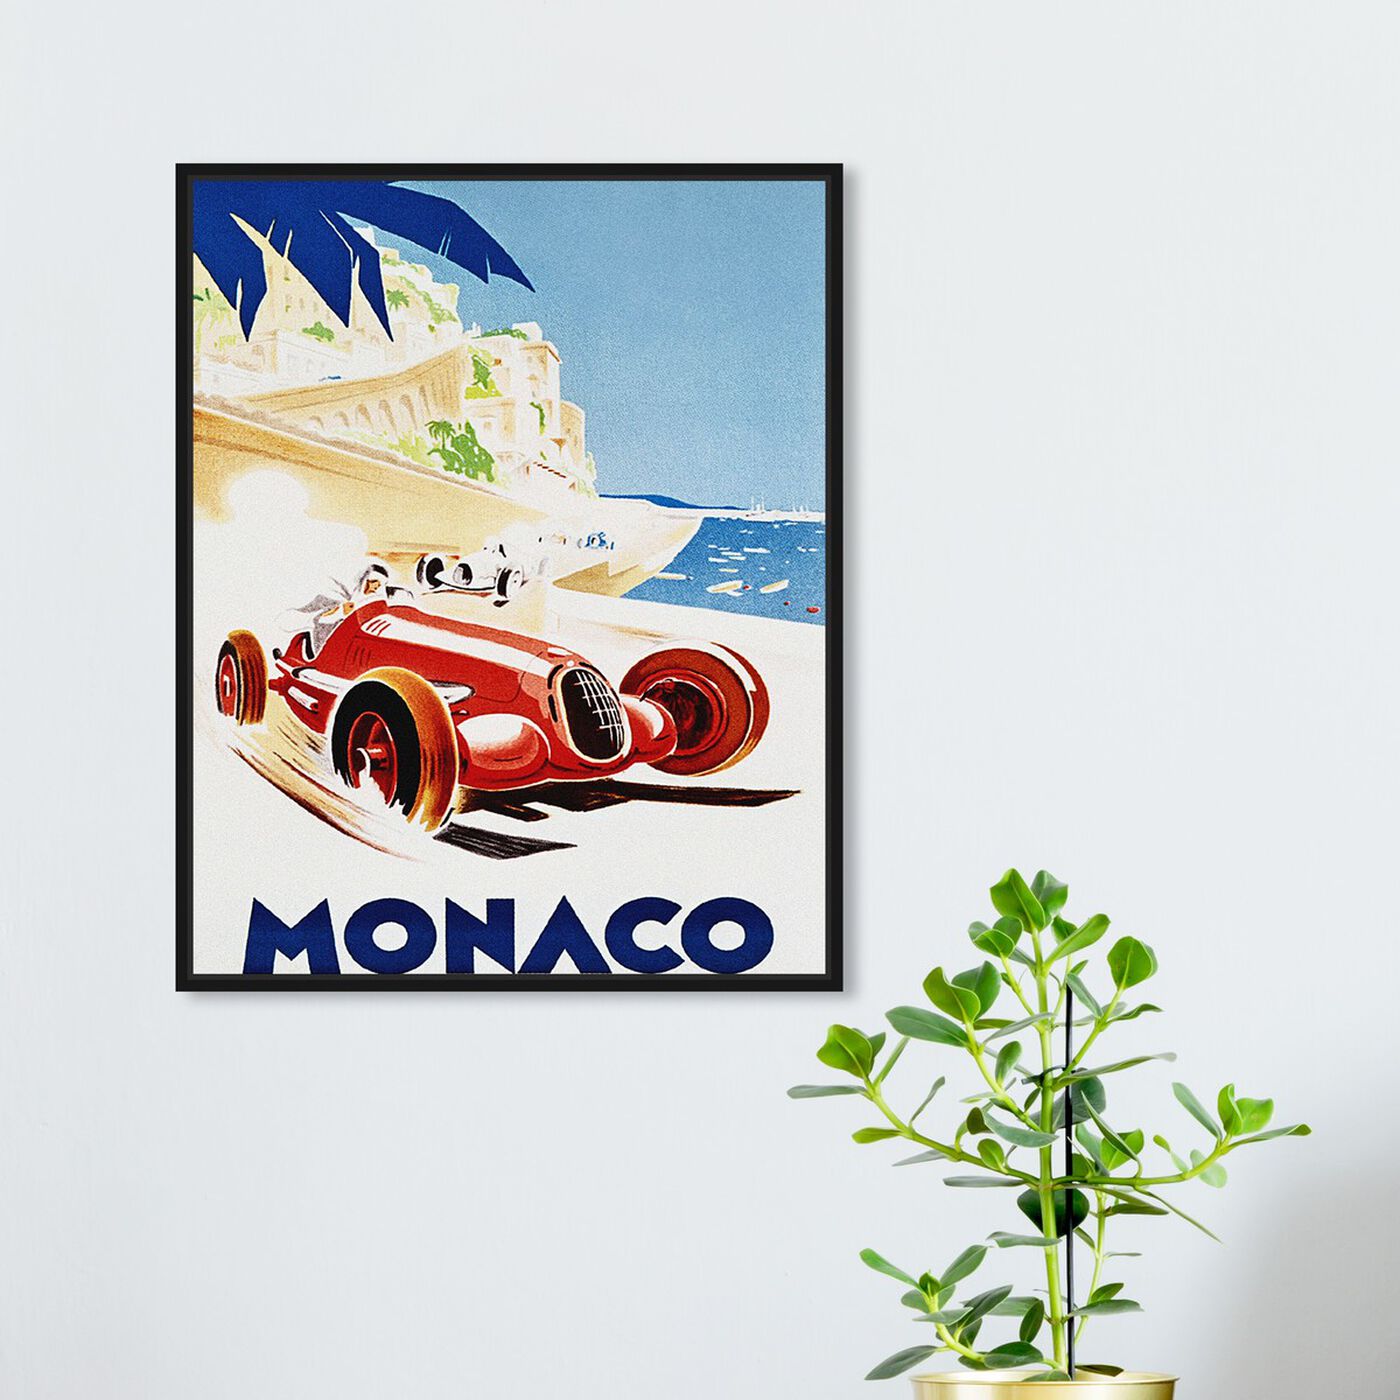 Hanging view of Monaco Grand Prix featuring advertising and posters art.